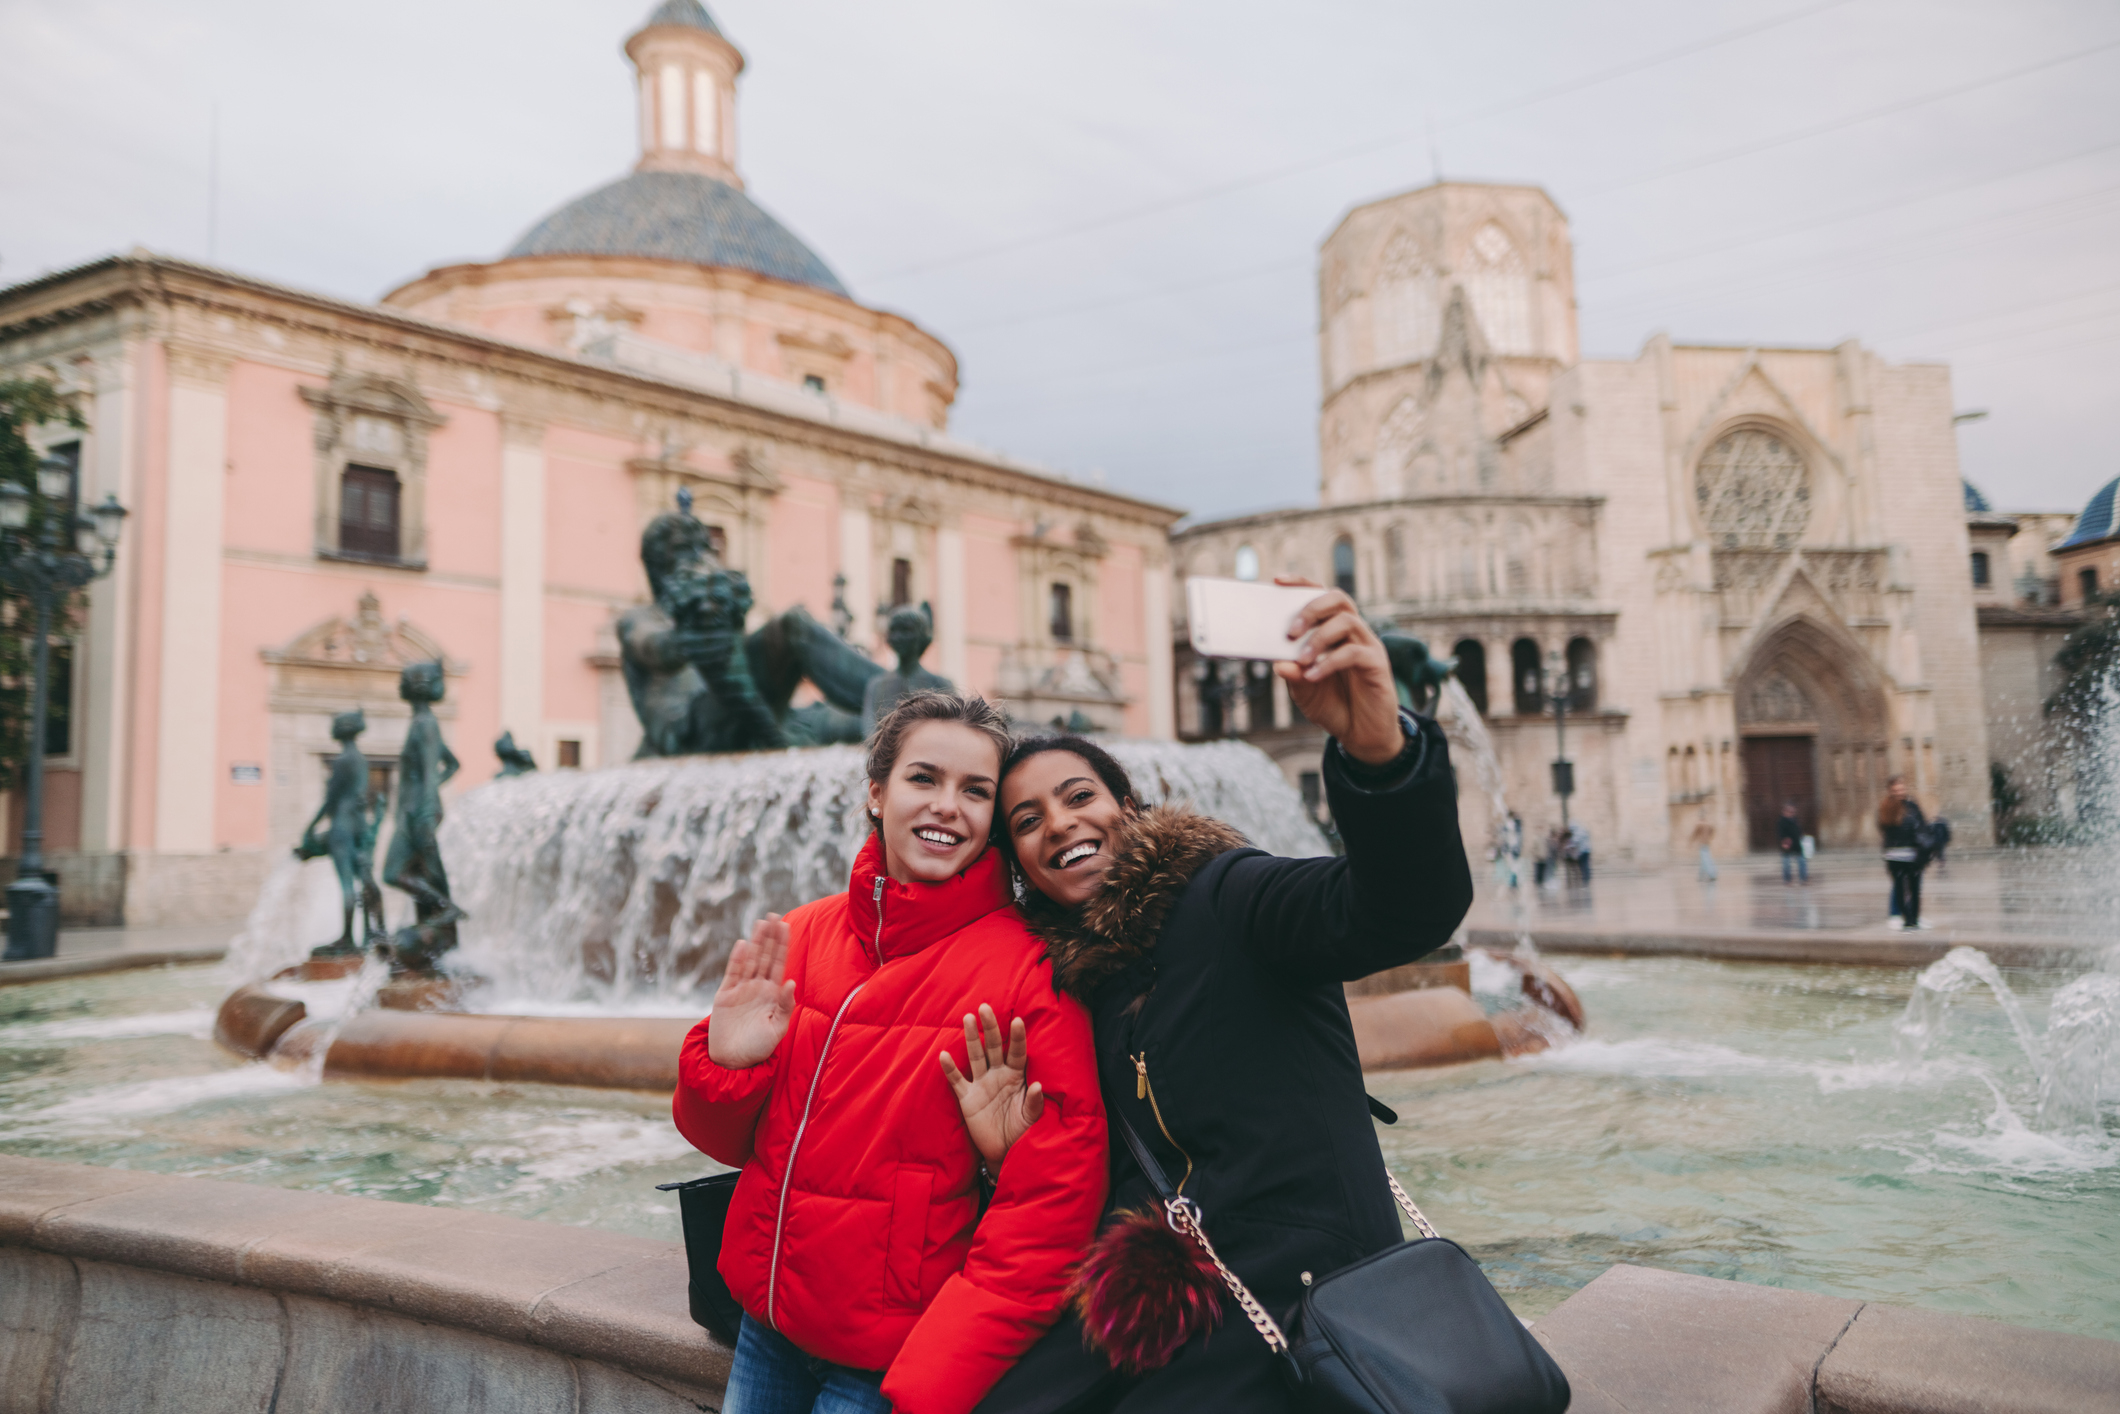 Two women are taking a selfie while on vacation